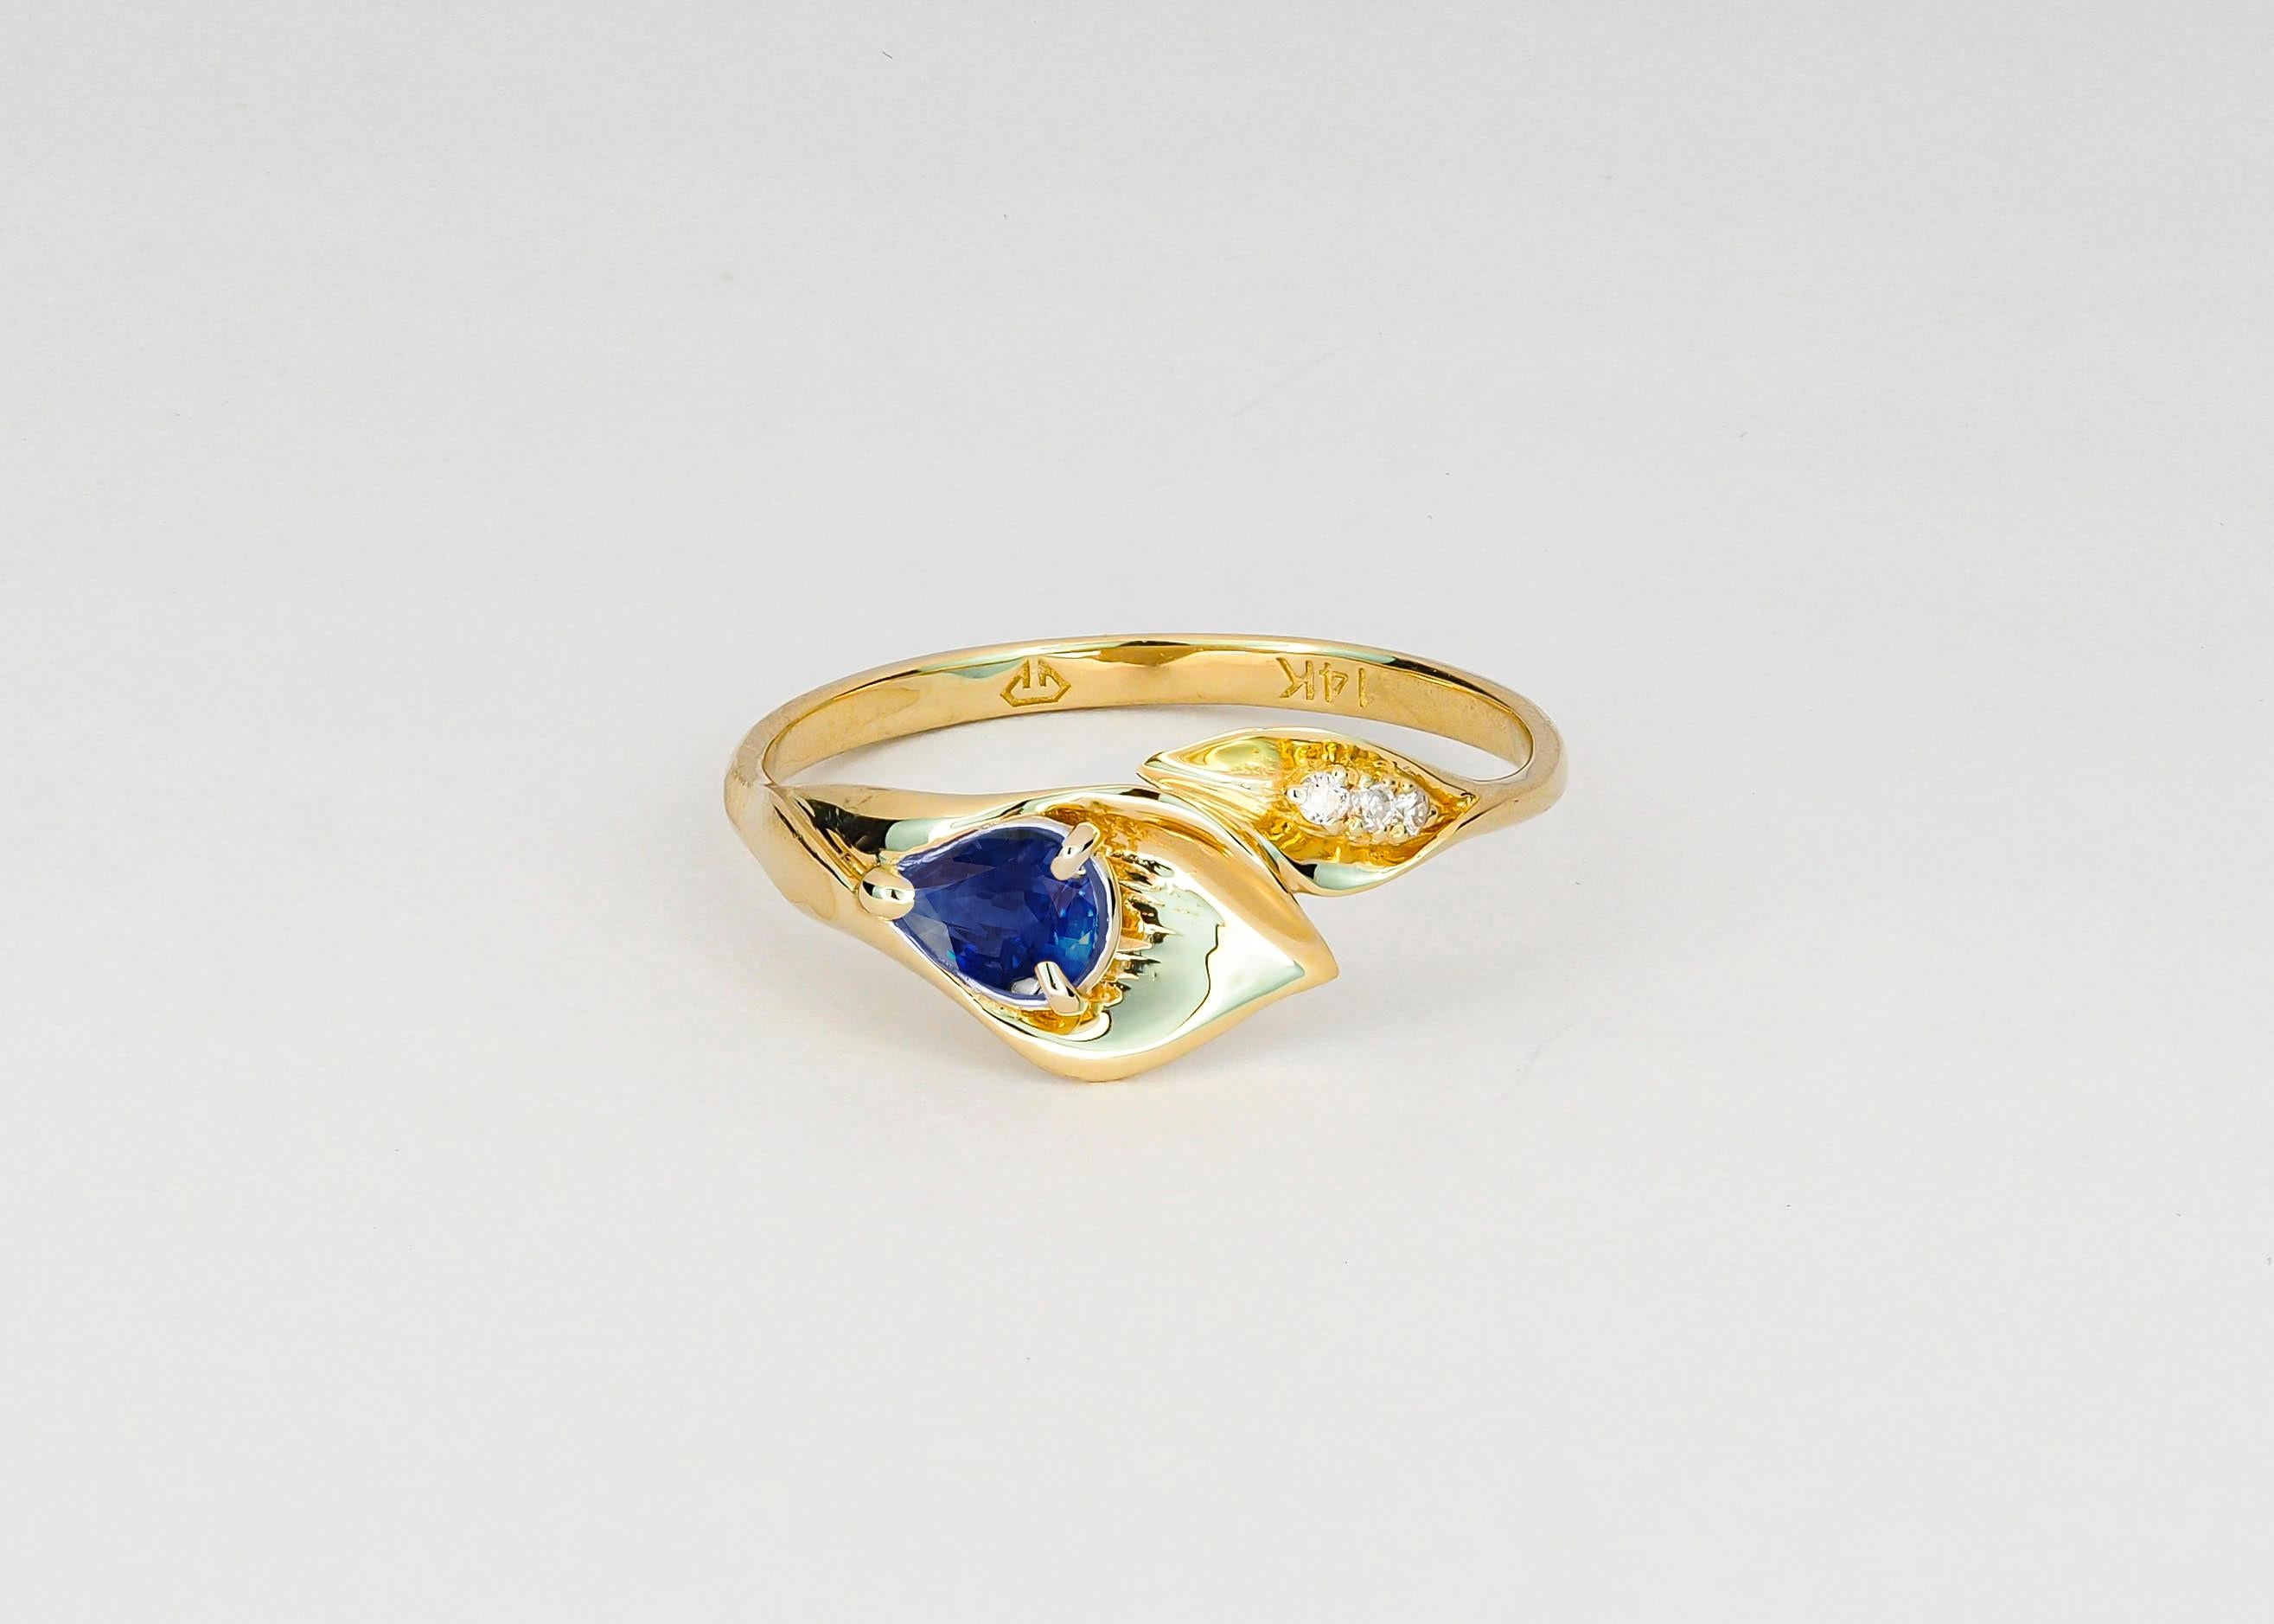 Lily calla gold ring. 
14 kt gold ring with sapphire and diamonds. Pear sapphire gold ring. Flower gold ring.Genuine sapphire ring.

Metal: 14k gold
Weight: 1.8 g. depends from size.

Set with sapphire
Pear cut, 0.70 ct.
Blue color
Clarity: